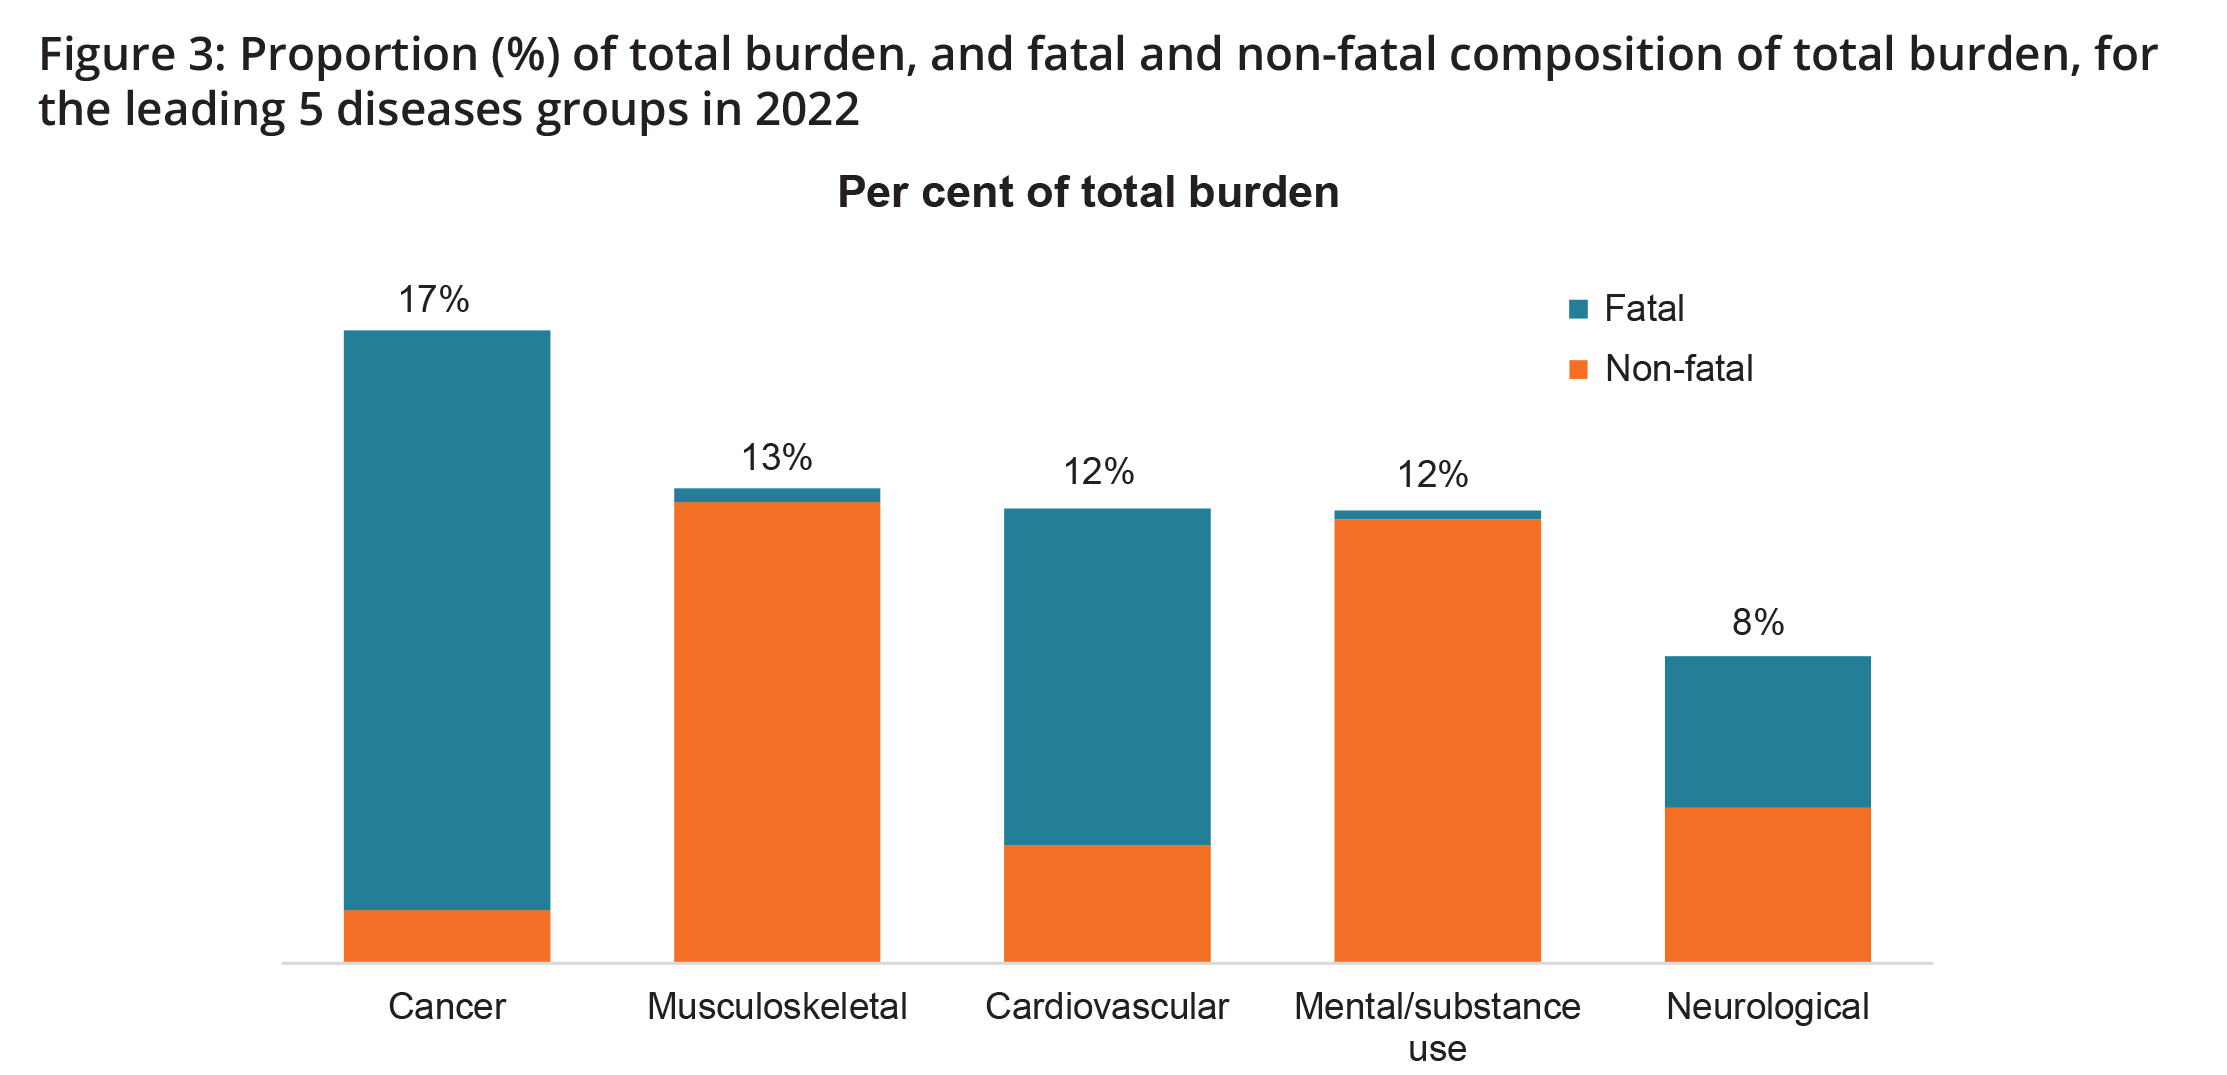 This figure is a stacked column chart which presents the proportion of total burden (DALY) contributed by each of the five leading disease groups in 2022. Each column represents a disease group and is shaded to show the proportion of non-fatal (YLD) and fatal (YLL) burden that make up the total burden for the disease group. The figure shows that the top five disease groups that caused total burden in 2022 were cancer (17%25 of total burden), musculoskeletal conditions (13%25), cardiovascular diseases (12%25), mental health conditions & substance use disorders (12%25) and neurological conditions (8%25). Cancer, cardiovascular diseases and neurological conditions predominantly caused fatal burden, whereas musculoskeletal conditions and mental health conditions & substance use disorders predominantly caused non-fatal burden.